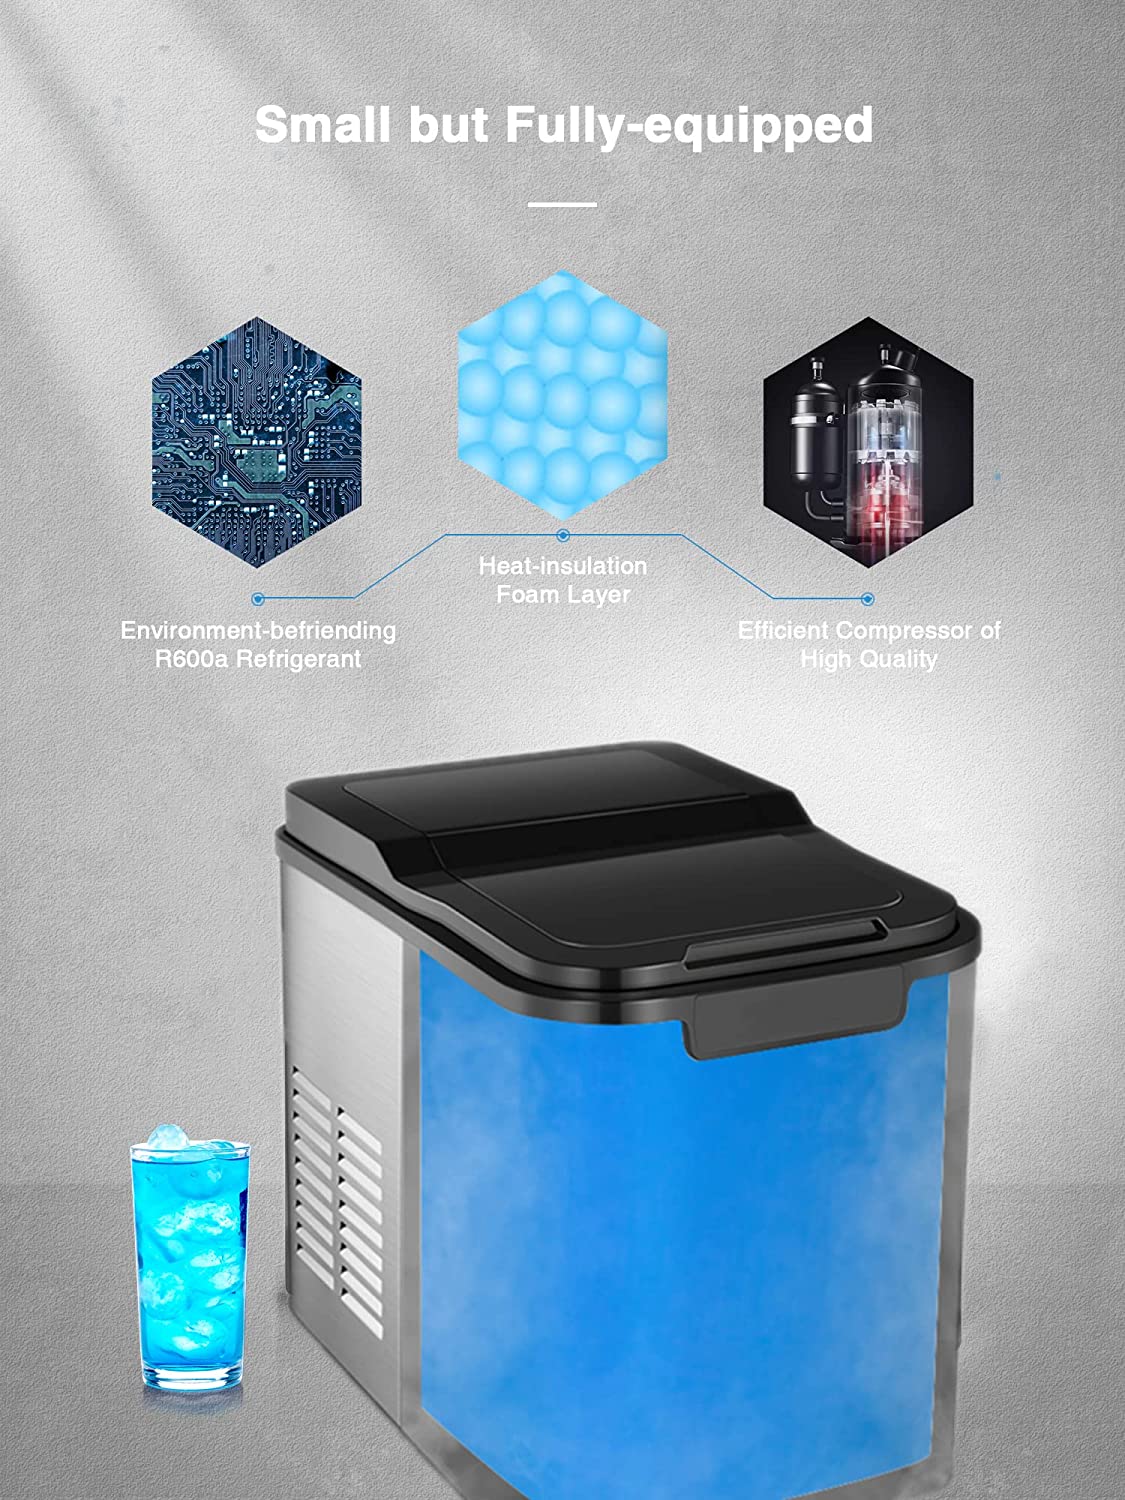 Ice Maker Machine Self Clean, 3 Size S/M/L, 13 KG / 28 lbs Ice in 24 Hrs, 9 Cubes in 6 Mins Ice Cube Maker, Timer, Ice Scoop, Basket & LED Display, for Home, RV, Kitchen, Office, Bar - Stainless Steel